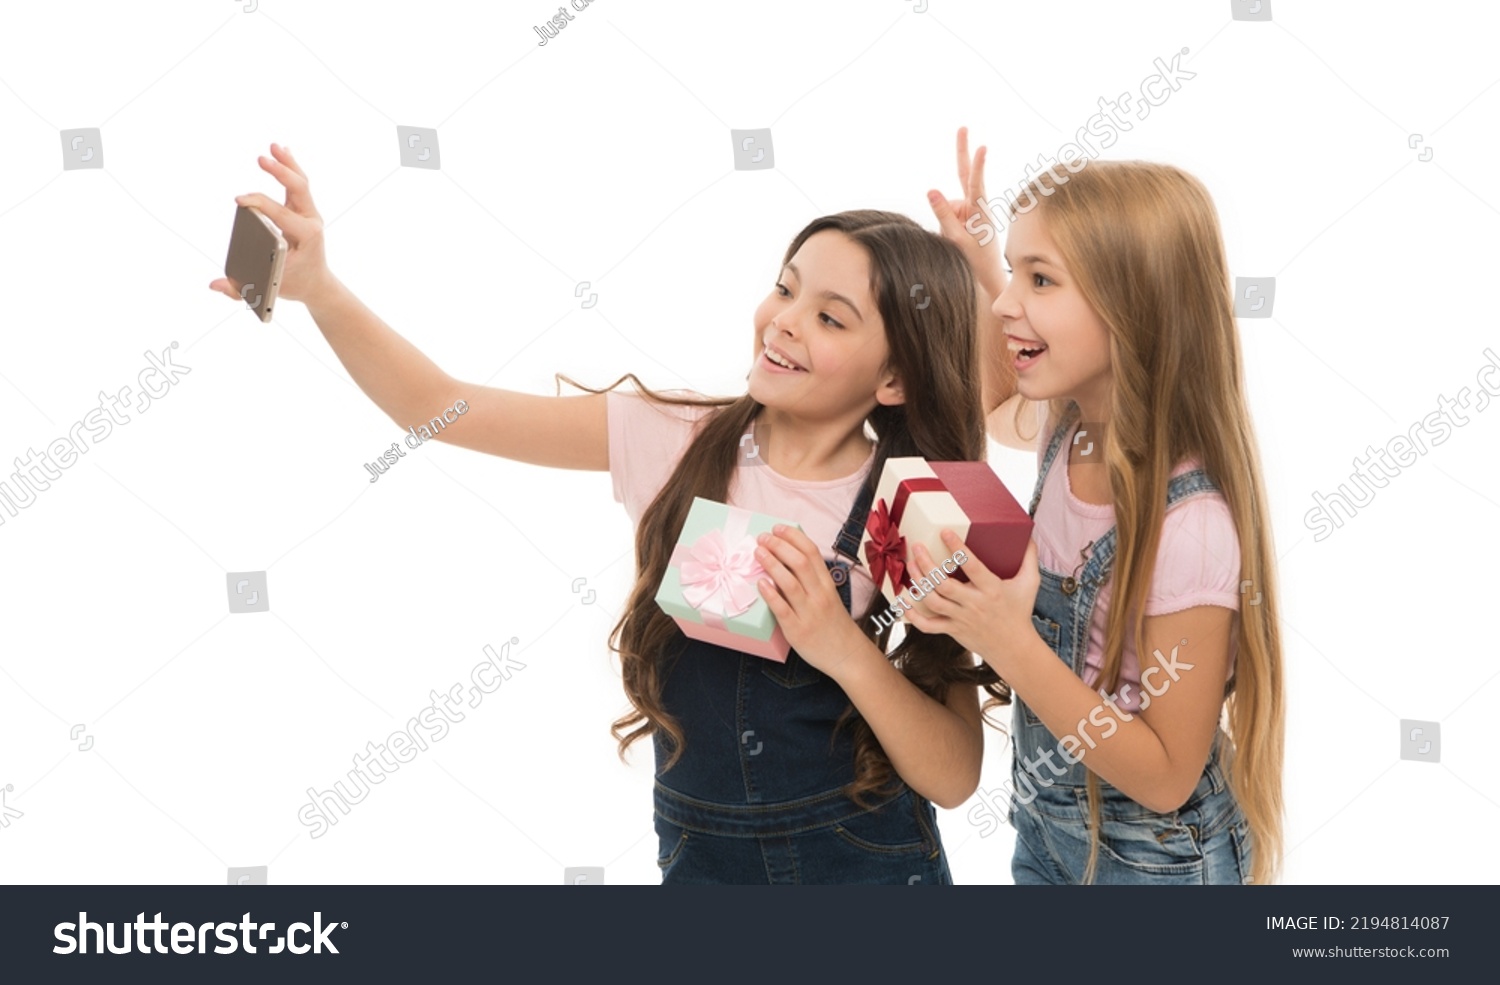 Private Selfie Shooting Adorable Little Girls Stock Photo 2194814087 ...